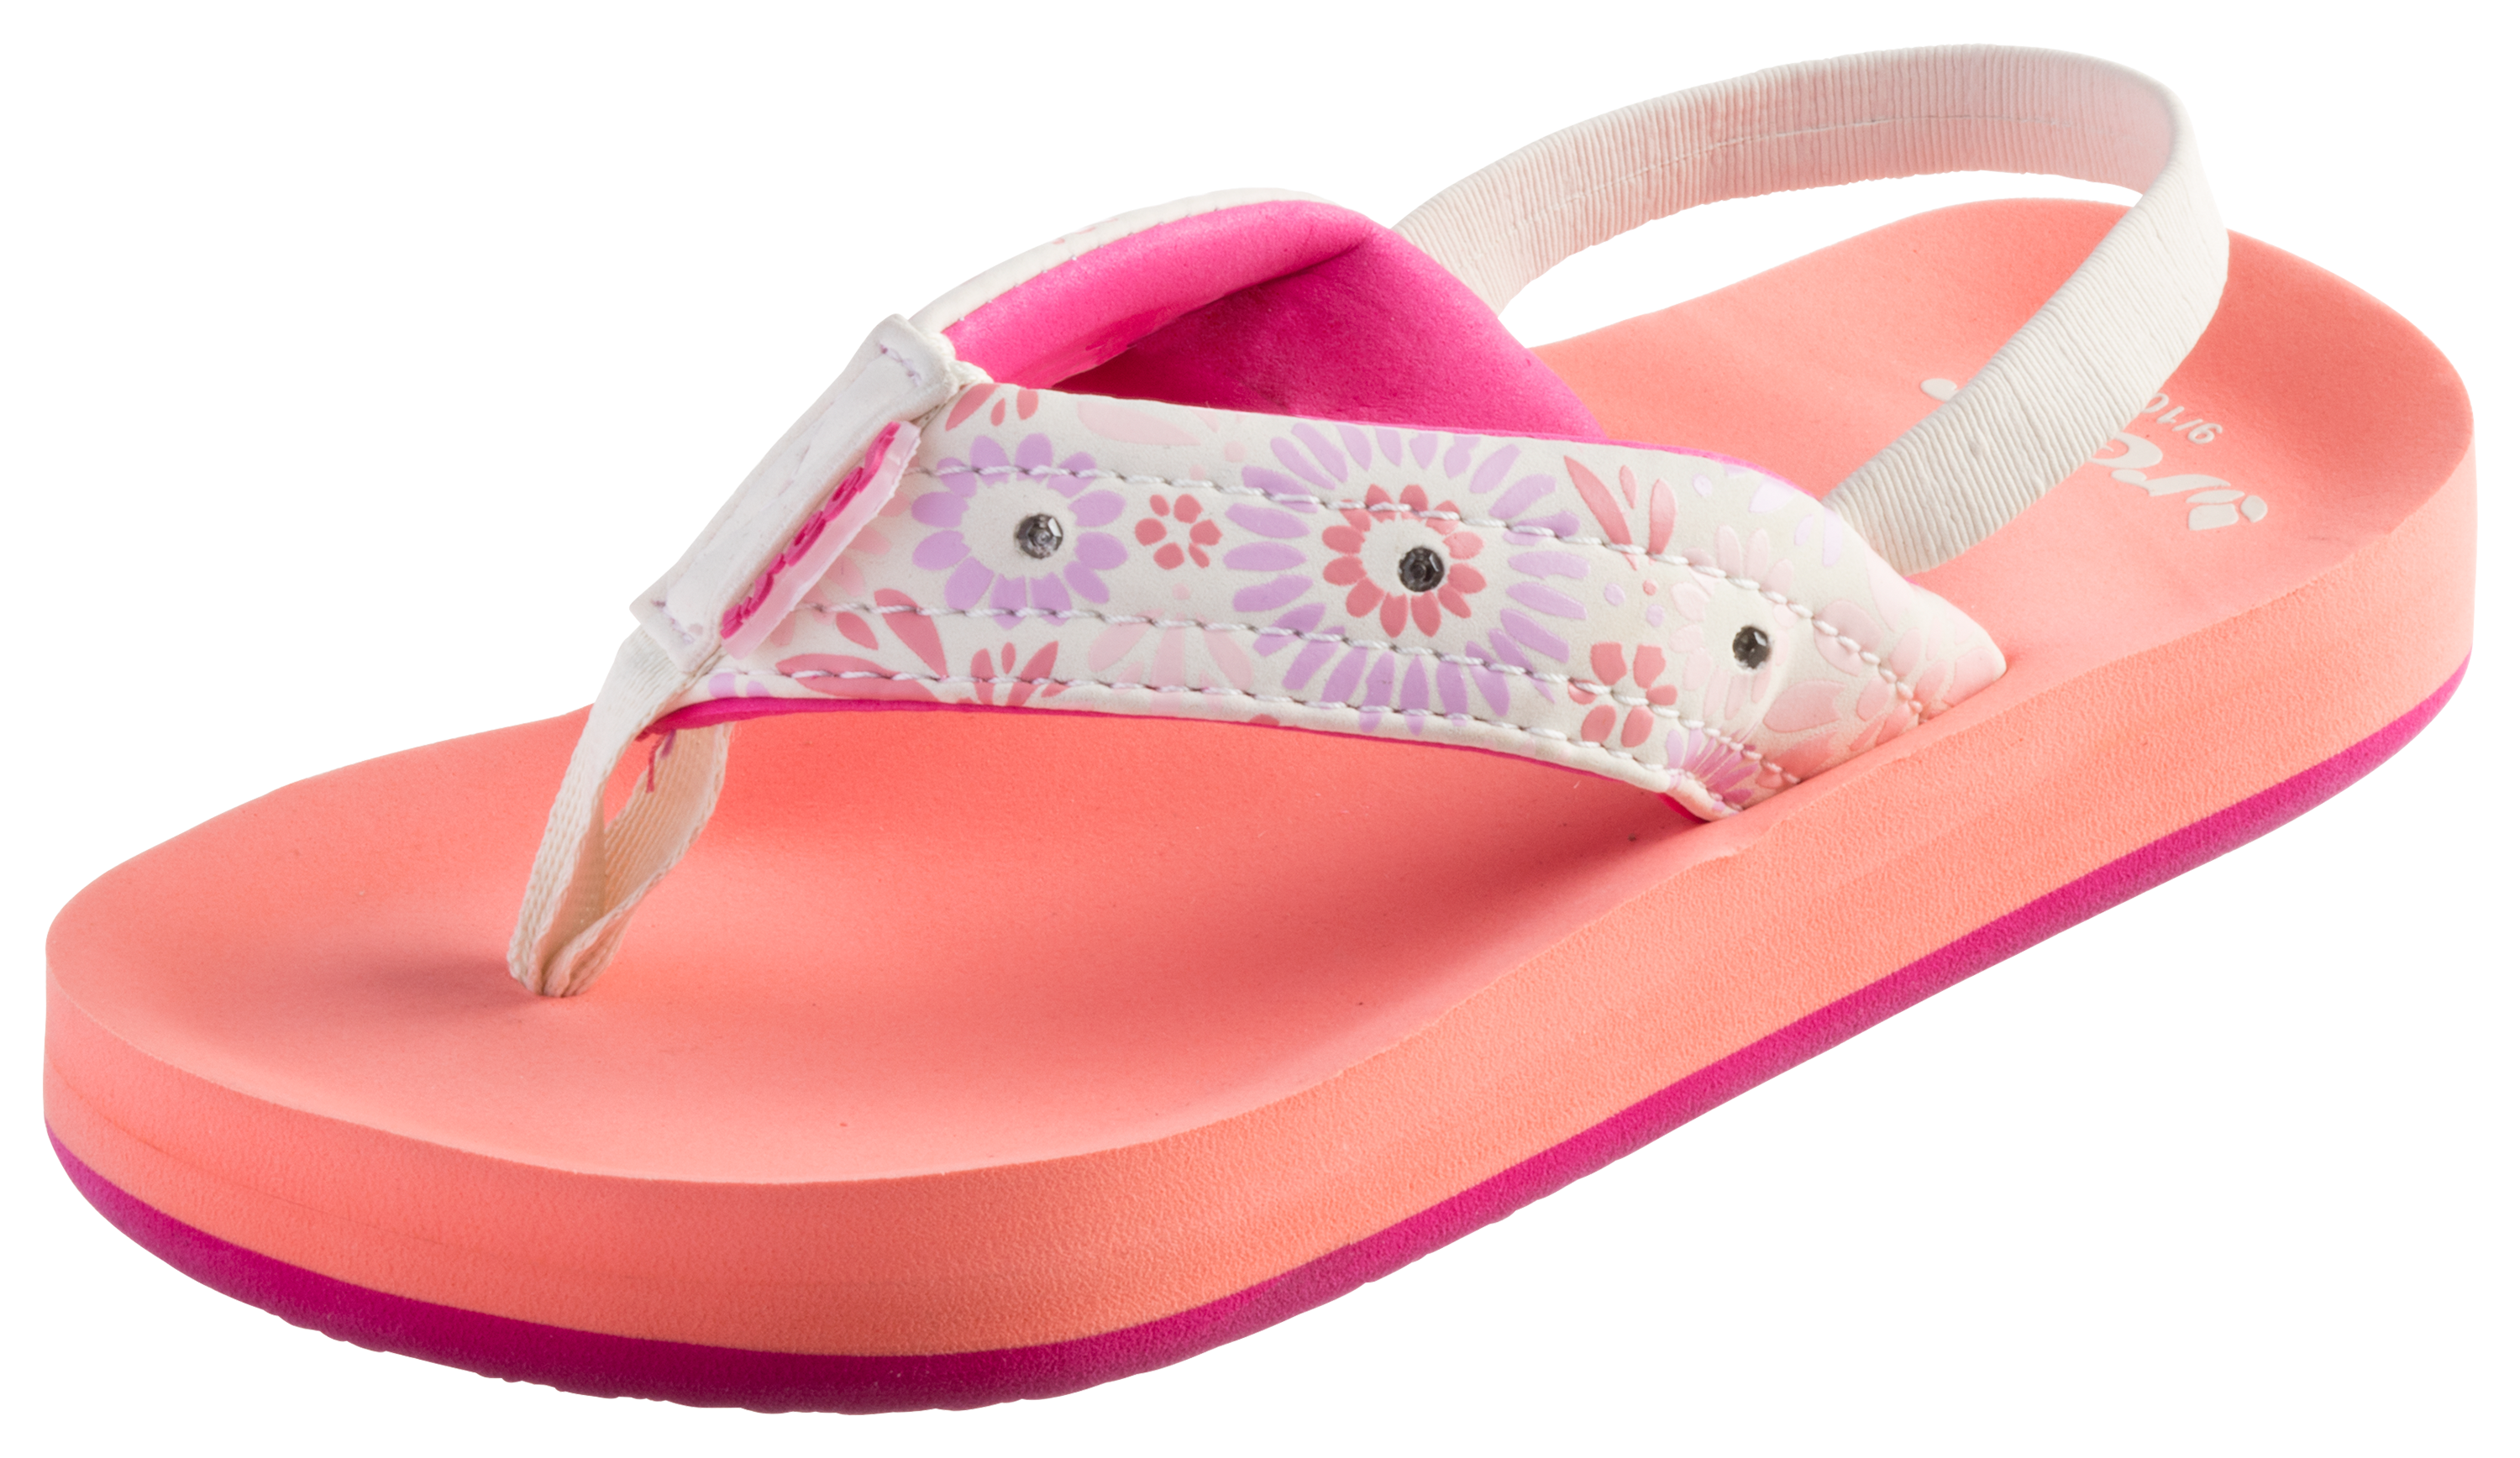 Reef Little Ahi Lights Sandals for Babies, Toddlers, or Kids | Bass Pro ...